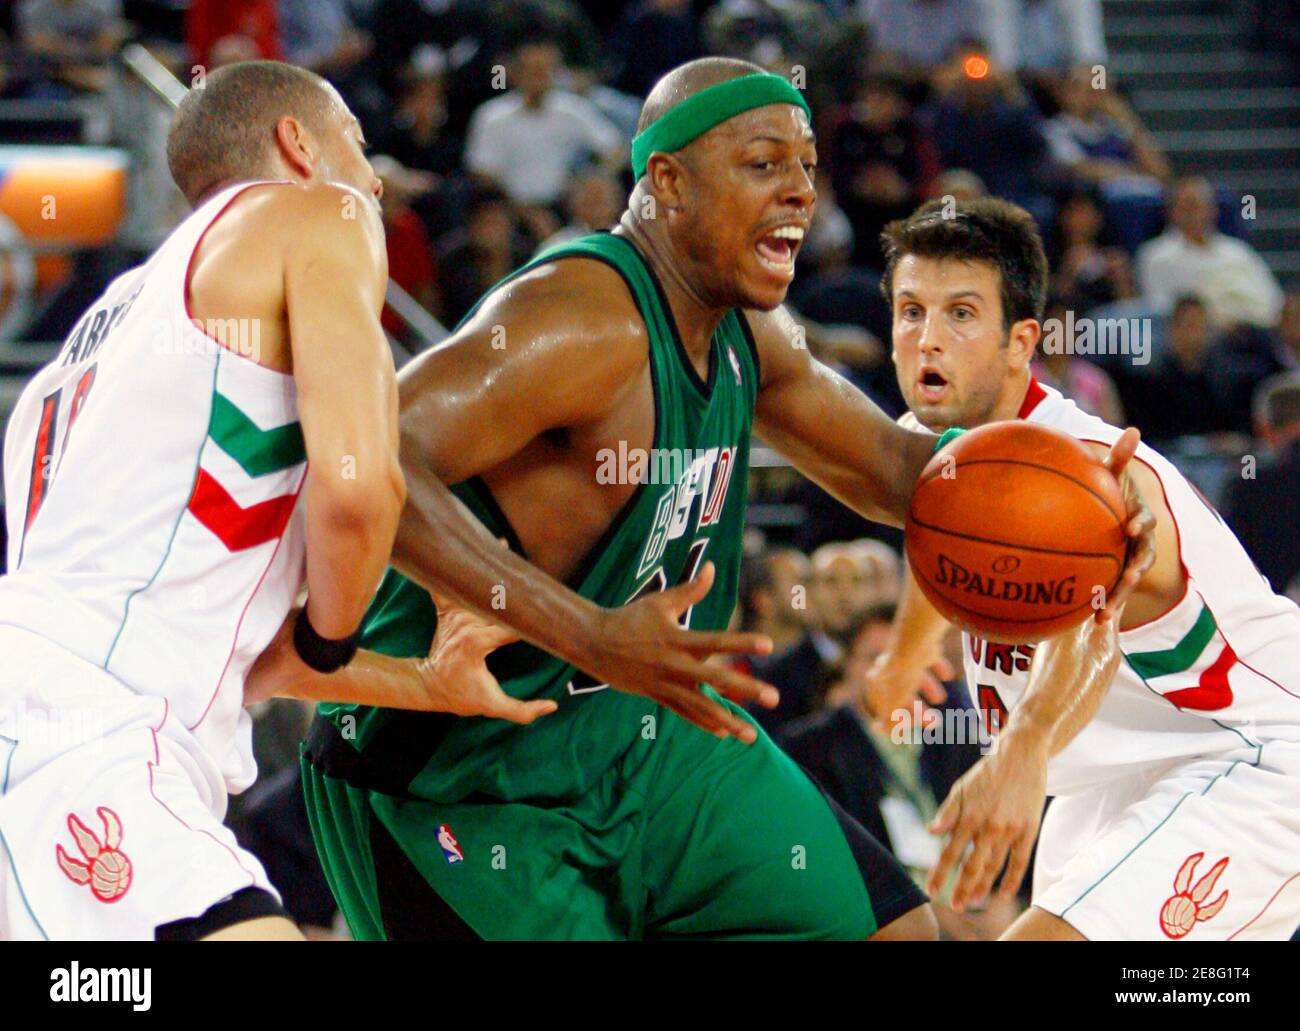 Boston Celtics' Paul Pierce is challenged by Toronto Raptors' Anthony Parker (L) and Jason Kapono (R) during an exhibition tournament basketball game in Rome October 6, 2007. The game is part of the NBA Europe Live tour.  REUTERS/Giampiero Sposito (ITALY) Stock Photo